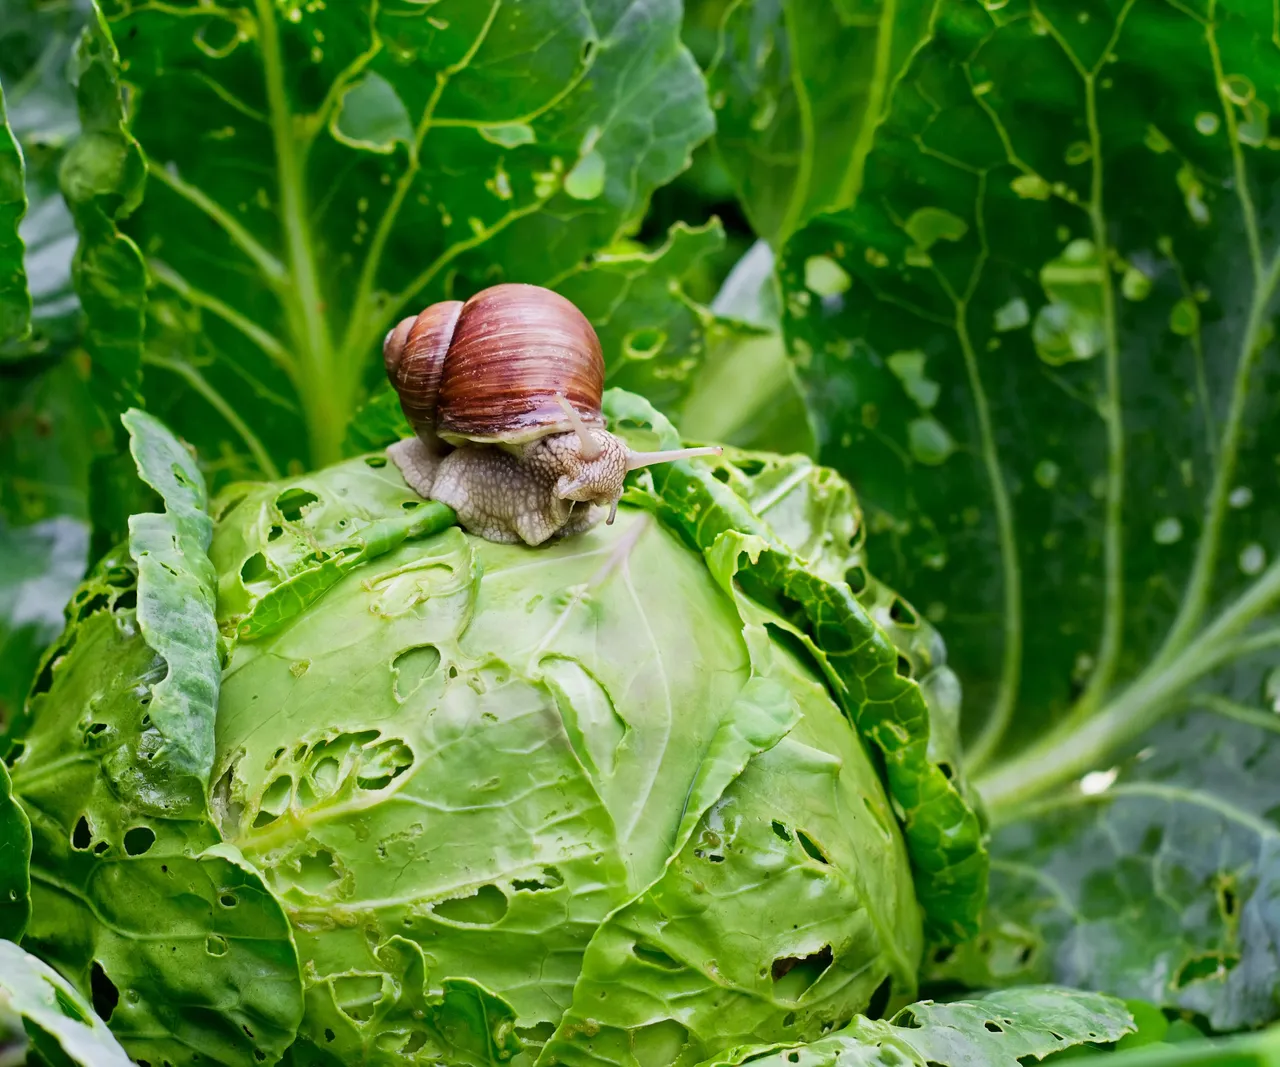 Top 5 Plants to Naturally Repel Snails from Yard